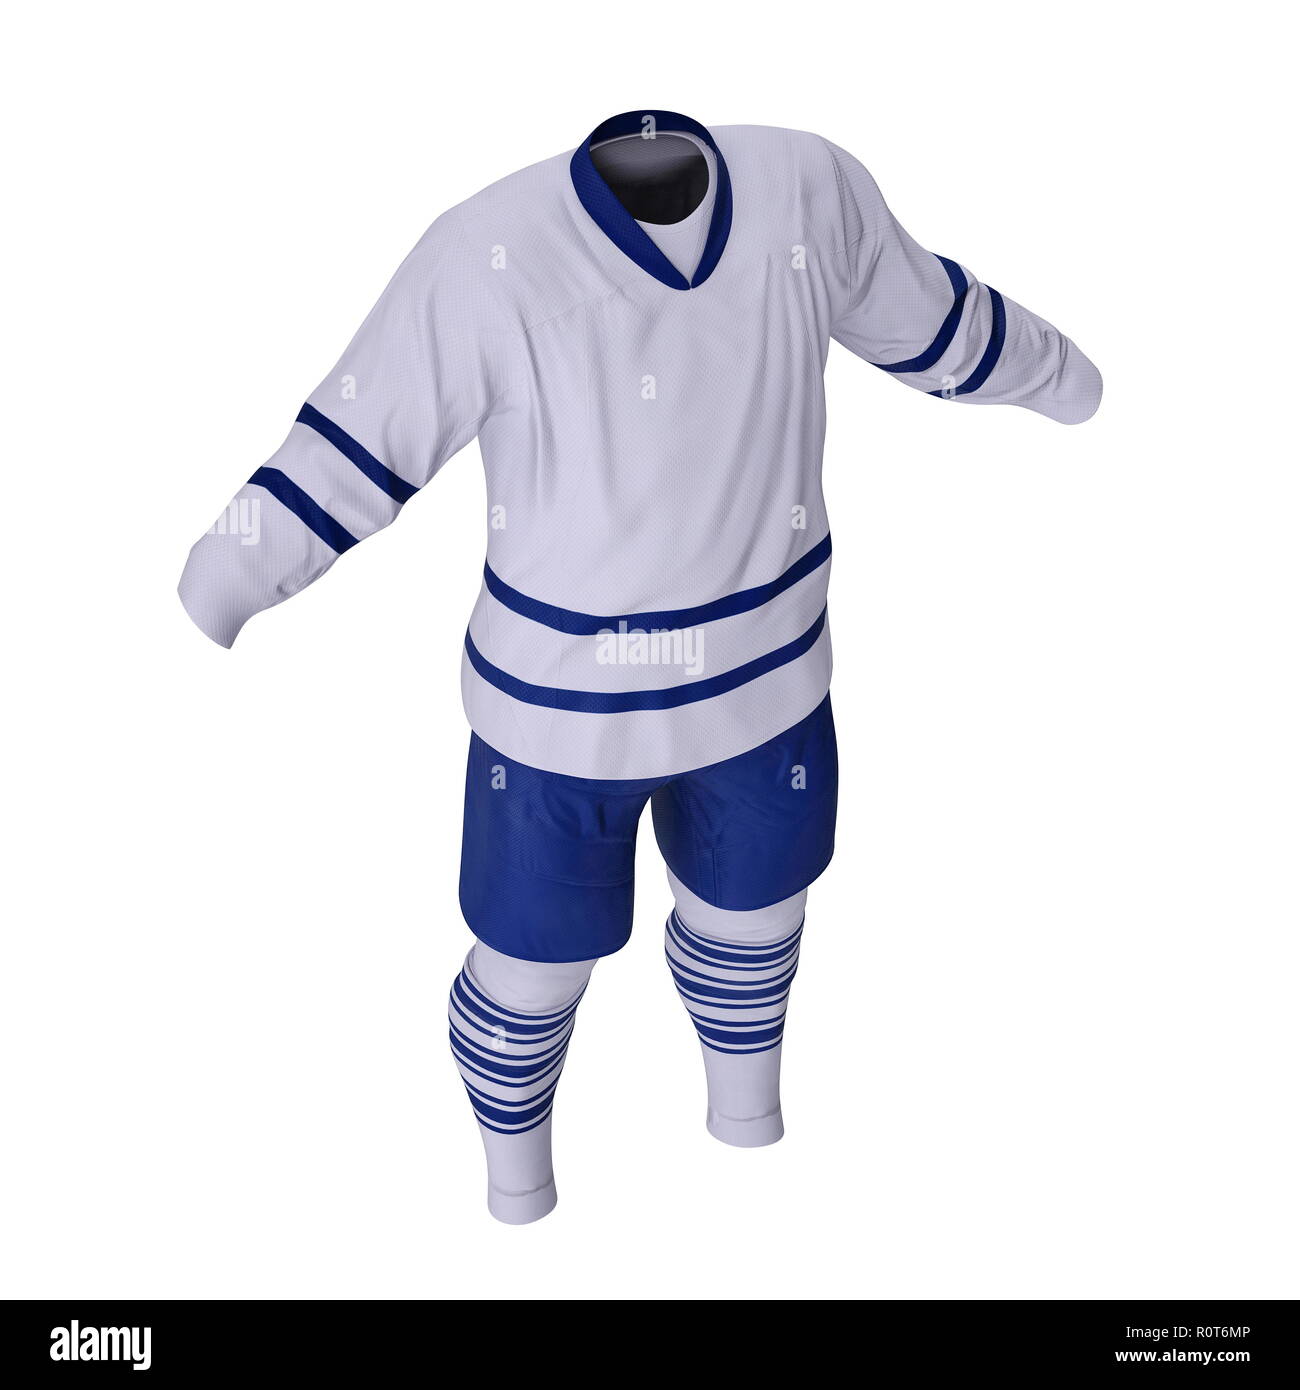 Hockey Jersey Template Images – Browse 1,335 Stock Photos, Vectors